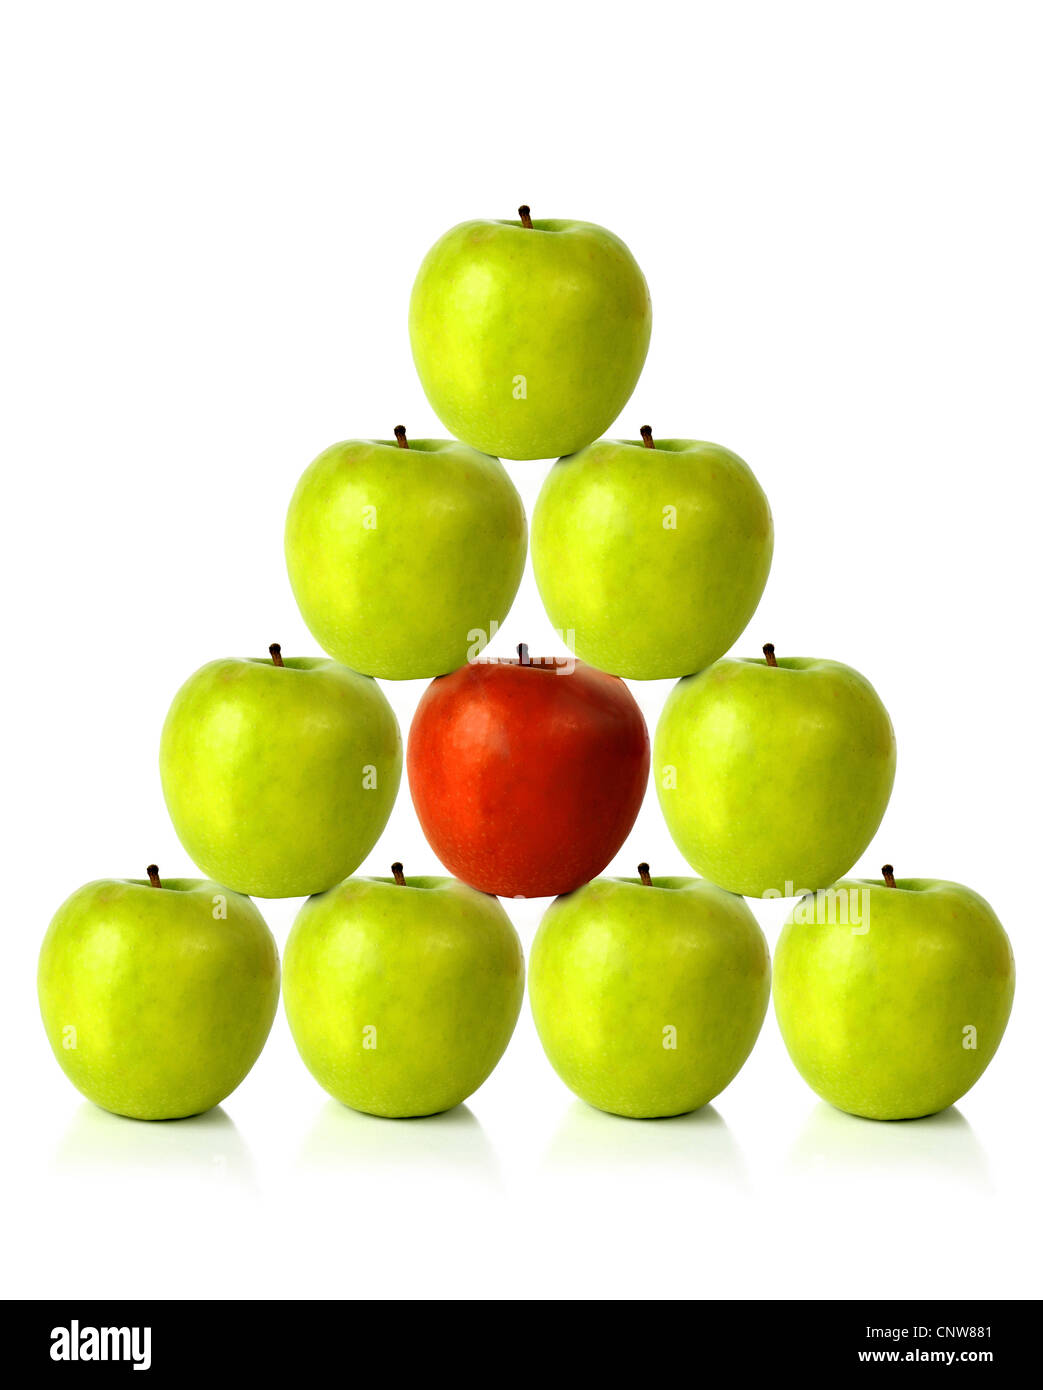 green apples on a pyramid shape with one red apple in the middle, be different Stock Photo